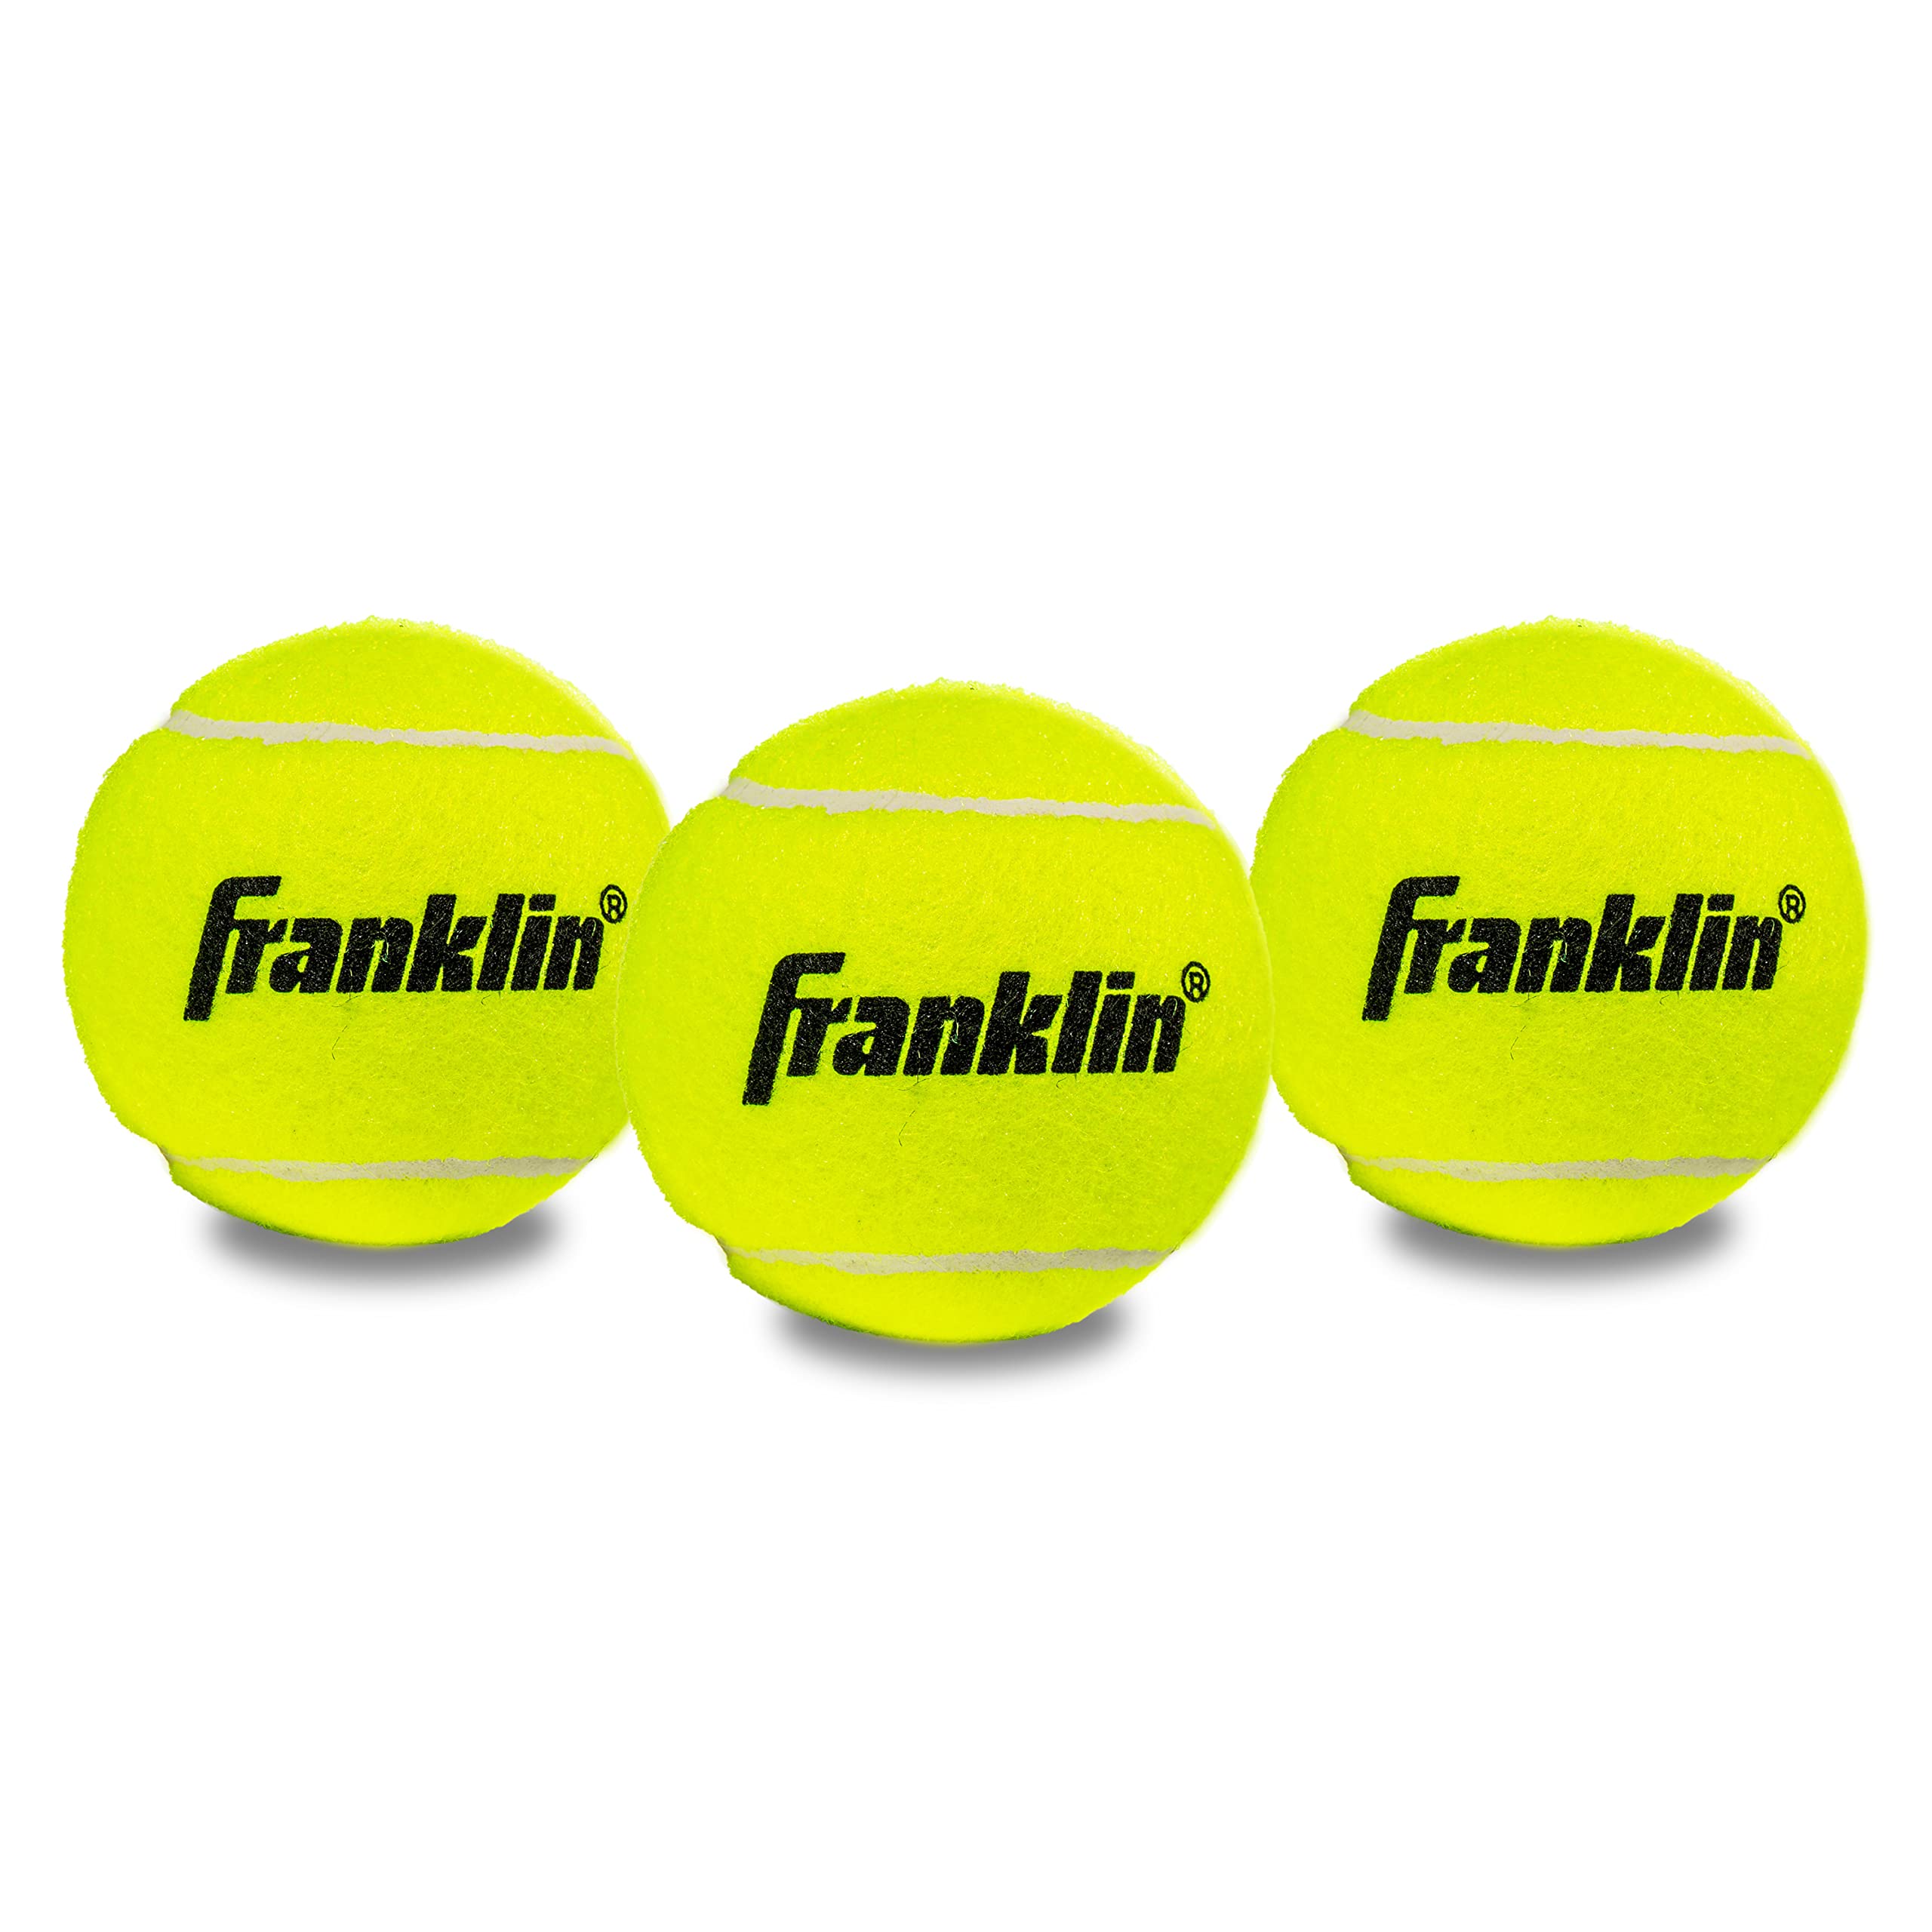 3-Pack Franklin Tennis Balls $2 + Free Shipping w/ Prime or on $35+